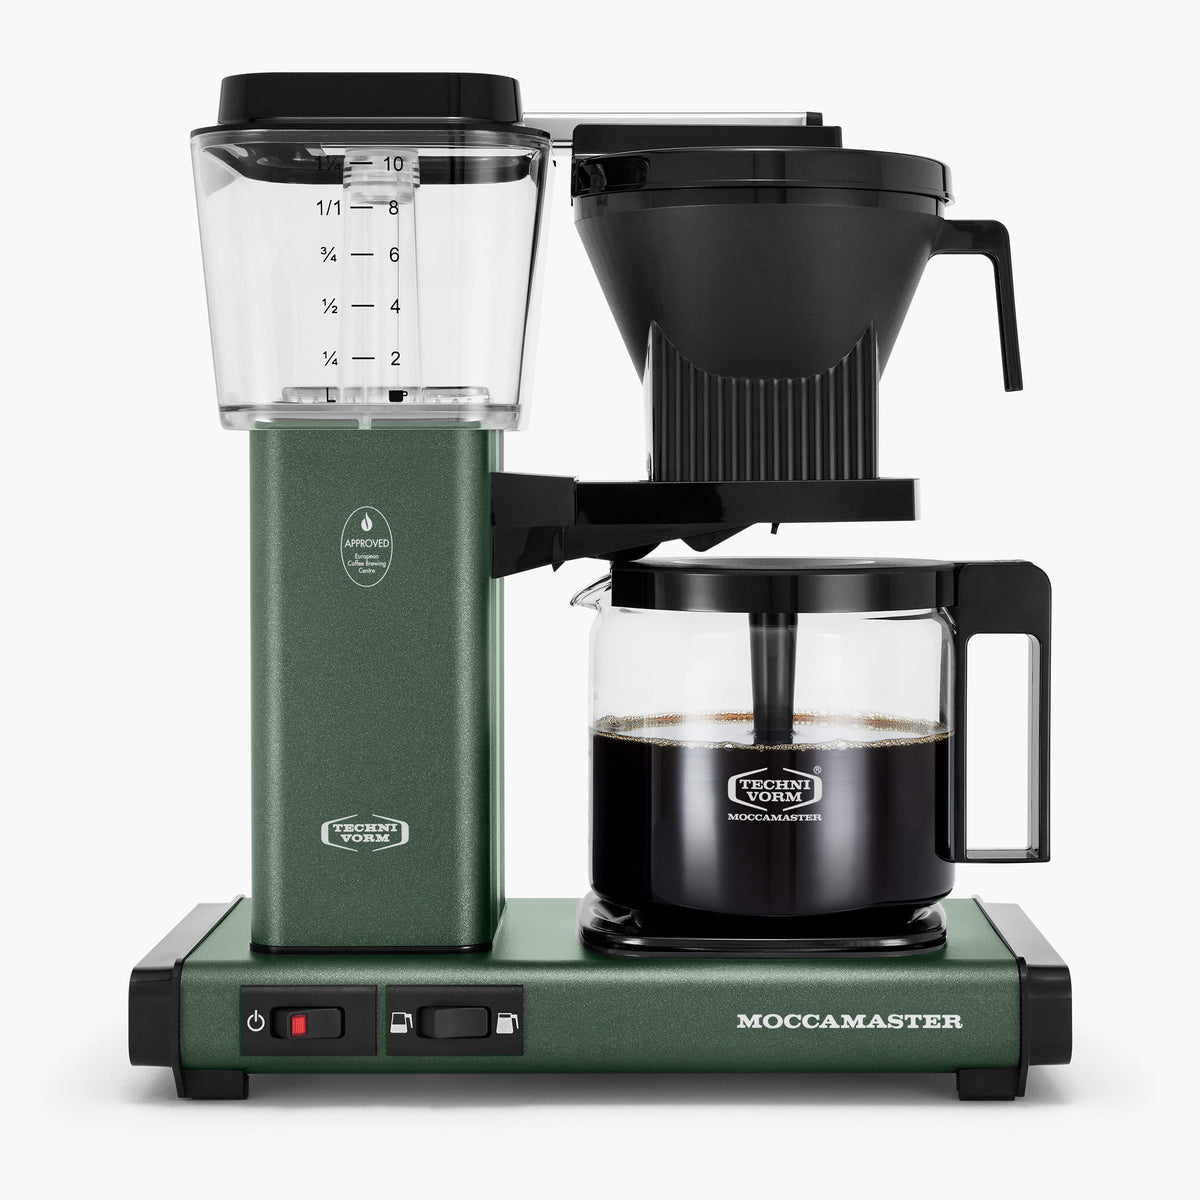 Moccamaster coffee machine in green, featuring a clear water reservoir, filter basket, and glass carafe